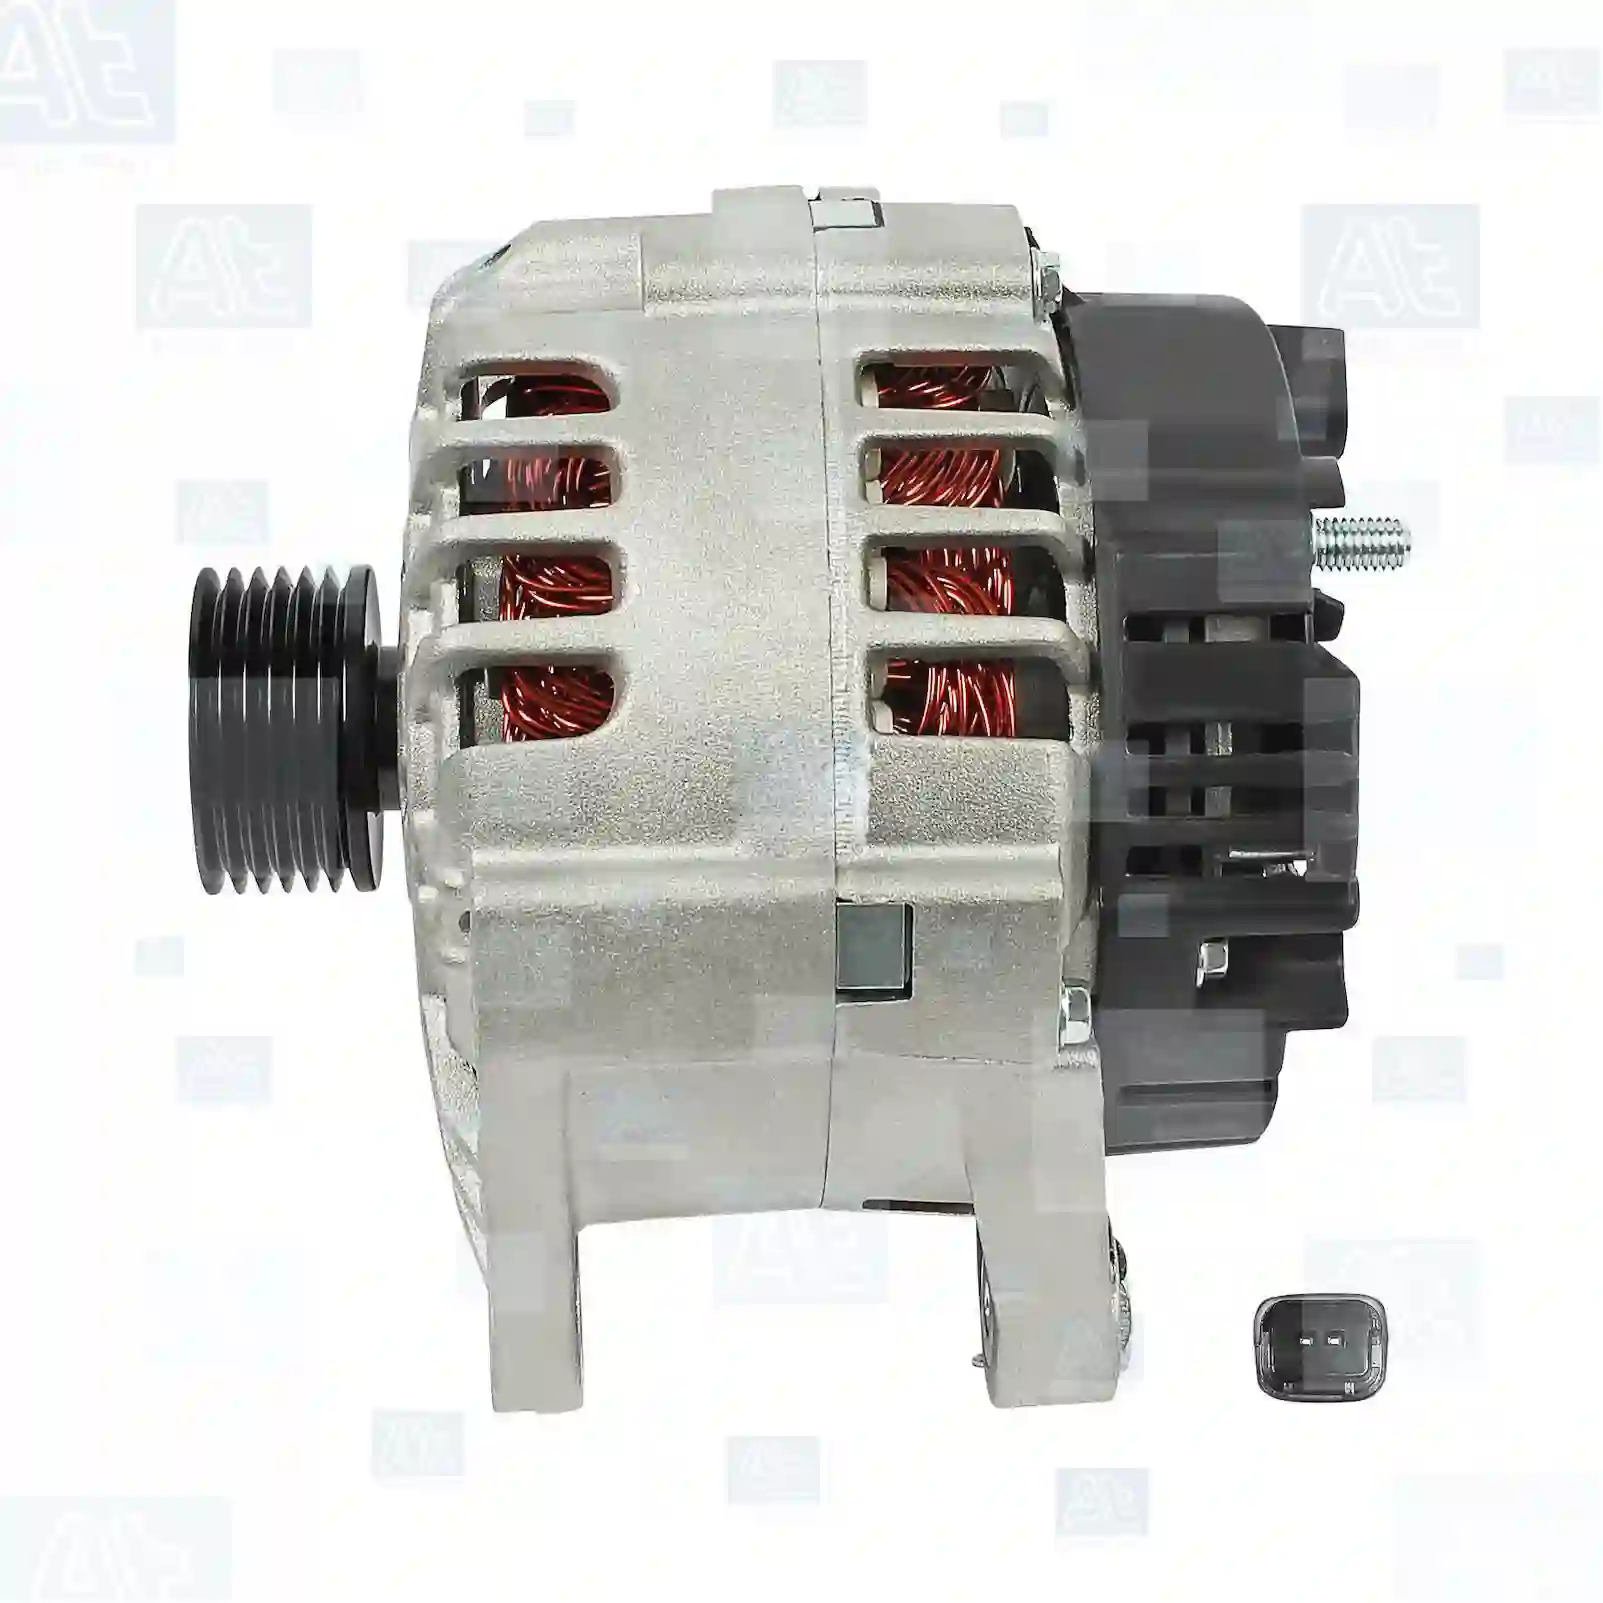 Alternator, at no 77710041, oem no: 6001548554, 7701473614, 7701476806, 7701477001, 8200022774, 8200523616, 4403540, 4433832, 4506176, 9111540, 9201826, 93160664, 93160665, 93160666, 93161035, 93161416, 93161425, 93161427, 93161923, 93169265, 93169471, 93189523, 93198179, 93198719, 2310000Q0A, 2310000Q0K, 2310000QAJ, 2310000QAK, 2310000QAM, 2310000QAP, 2310000QAU, 2310000QBF, 23100-00Q0A, 23100-00Q0E, 23100-00Q0K, 23100-00Q1F, 23100-00Q1G, 23100-00QA7, 23100-00QA8, 23100-00QAC, 23100-00QAE, 23100-00QAJ, 23100-00QAK, 23100-00QAM, 23100-00QAP, 23100-00QAU, 23100-00QBE, 23100-00QBF, 23100-00QBG, 23100-00QOA, 23100-00QOE, 23100-00QOK, 23100-BN700, 23100-BN704, 77004-27476, 1204189, 4403540, 4411316, 4411318, 4412503, 4416872, 4417295, 4419076, 4430012, 4430569, 4430587, 4430591, 4430595, 4433830, 4506176, 5281052700, 6001548554, 7700426849, 7700427476, 7701473614, 7701474416, 7701476806, 7701476807, 7701477001, 7701478093, 7711134313, 7711134314, 7711134316, 7711134329, 7711368834, 7711497093, 7711497095, 7711497616, 8200062583, 8200112055, 8200120286, 8200120417, 8200153713, 8200162474, 8200206251, 8200373636, 8200386806, 8200468131, 8200495302, 8200495304, 8200523616, 8200538407, 8200538816, 8200584040, 8200667608, 8200690190, 8200690199, 8200690202, 2543339, 36002231, 8251641, 8253785, 8253860, 8602279, 8602806, 8666126 At Spare Part | Engine, Accelerator Pedal, Camshaft, Connecting Rod, Crankcase, Crankshaft, Cylinder Head, Engine Suspension Mountings, Exhaust Manifold, Exhaust Gas Recirculation, Filter Kits, Flywheel Housing, General Overhaul Kits, Engine, Intake Manifold, Oil Cleaner, Oil Cooler, Oil Filter, Oil Pump, Oil Sump, Piston & Liner, Sensor & Switch, Timing Case, Turbocharger, Cooling System, Belt Tensioner, Coolant Filter, Coolant Pipe, Corrosion Prevention Agent, Drive, Expansion Tank, Fan, Intercooler, Monitors & Gauges, Radiator, Thermostat, V-Belt / Timing belt, Water Pump, Fuel System, Electronical Injector Unit, Feed Pump, Fuel Filter, cpl., Fuel Gauge Sender,  Fuel Line, Fuel Pump, Fuel Tank, Injection Line Kit, Injection Pump, Exhaust System, Clutch & Pedal, Gearbox, Propeller Shaft, Axles, Brake System, Hubs & Wheels, Suspension, Leaf Spring, Universal Parts / Accessories, Steering, Electrical System, Cabin Alternator, at no 77710041, oem no: 6001548554, 7701473614, 7701476806, 7701477001, 8200022774, 8200523616, 4403540, 4433832, 4506176, 9111540, 9201826, 93160664, 93160665, 93160666, 93161035, 93161416, 93161425, 93161427, 93161923, 93169265, 93169471, 93189523, 93198179, 93198719, 2310000Q0A, 2310000Q0K, 2310000QAJ, 2310000QAK, 2310000QAM, 2310000QAP, 2310000QAU, 2310000QBF, 23100-00Q0A, 23100-00Q0E, 23100-00Q0K, 23100-00Q1F, 23100-00Q1G, 23100-00QA7, 23100-00QA8, 23100-00QAC, 23100-00QAE, 23100-00QAJ, 23100-00QAK, 23100-00QAM, 23100-00QAP, 23100-00QAU, 23100-00QBE, 23100-00QBF, 23100-00QBG, 23100-00QOA, 23100-00QOE, 23100-00QOK, 23100-BN700, 23100-BN704, 77004-27476, 1204189, 4403540, 4411316, 4411318, 4412503, 4416872, 4417295, 4419076, 4430012, 4430569, 4430587, 4430591, 4430595, 4433830, 4506176, 5281052700, 6001548554, 7700426849, 7700427476, 7701473614, 7701474416, 7701476806, 7701476807, 7701477001, 7701478093, 7711134313, 7711134314, 7711134316, 7711134329, 7711368834, 7711497093, 7711497095, 7711497616, 8200062583, 8200112055, 8200120286, 8200120417, 8200153713, 8200162474, 8200206251, 8200373636, 8200386806, 8200468131, 8200495302, 8200495304, 8200523616, 8200538407, 8200538816, 8200584040, 8200667608, 8200690190, 8200690199, 8200690202, 2543339, 36002231, 8251641, 8253785, 8253860, 8602279, 8602806, 8666126 At Spare Part | Engine, Accelerator Pedal, Camshaft, Connecting Rod, Crankcase, Crankshaft, Cylinder Head, Engine Suspension Mountings, Exhaust Manifold, Exhaust Gas Recirculation, Filter Kits, Flywheel Housing, General Overhaul Kits, Engine, Intake Manifold, Oil Cleaner, Oil Cooler, Oil Filter, Oil Pump, Oil Sump, Piston & Liner, Sensor & Switch, Timing Case, Turbocharger, Cooling System, Belt Tensioner, Coolant Filter, Coolant Pipe, Corrosion Prevention Agent, Drive, Expansion Tank, Fan, Intercooler, Monitors & Gauges, Radiator, Thermostat, V-Belt / Timing belt, Water Pump, Fuel System, Electronical Injector Unit, Feed Pump, Fuel Filter, cpl., Fuel Gauge Sender,  Fuel Line, Fuel Pump, Fuel Tank, Injection Line Kit, Injection Pump, Exhaust System, Clutch & Pedal, Gearbox, Propeller Shaft, Axles, Brake System, Hubs & Wheels, Suspension, Leaf Spring, Universal Parts / Accessories, Steering, Electrical System, Cabin